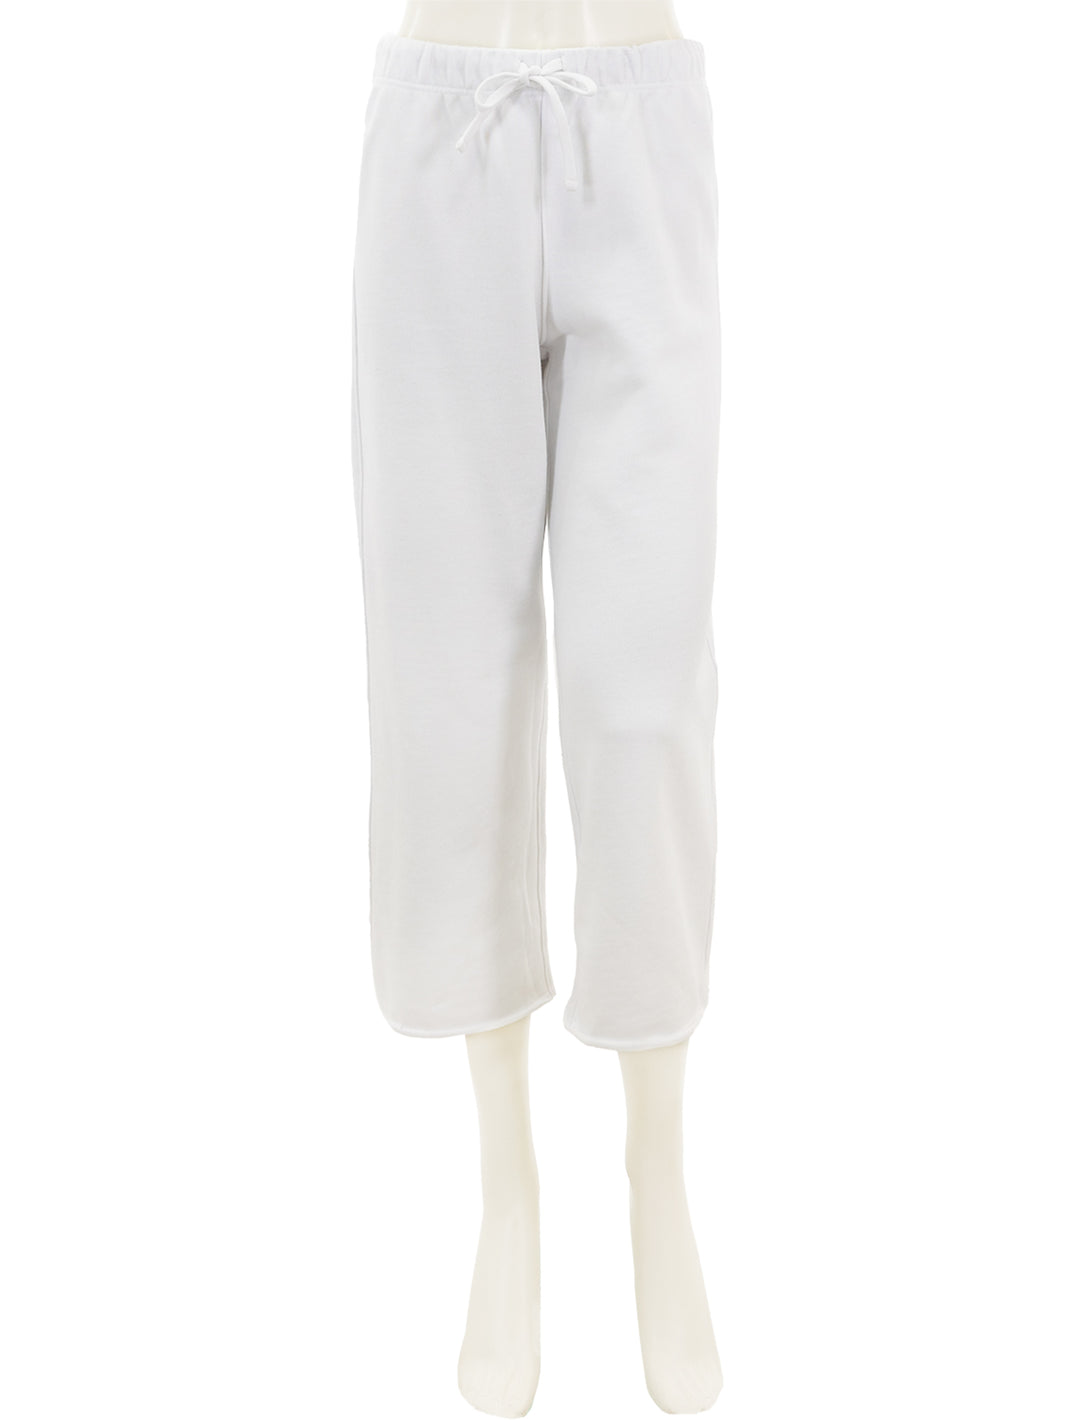 Front view of Splendid's cassie terry pant in white.